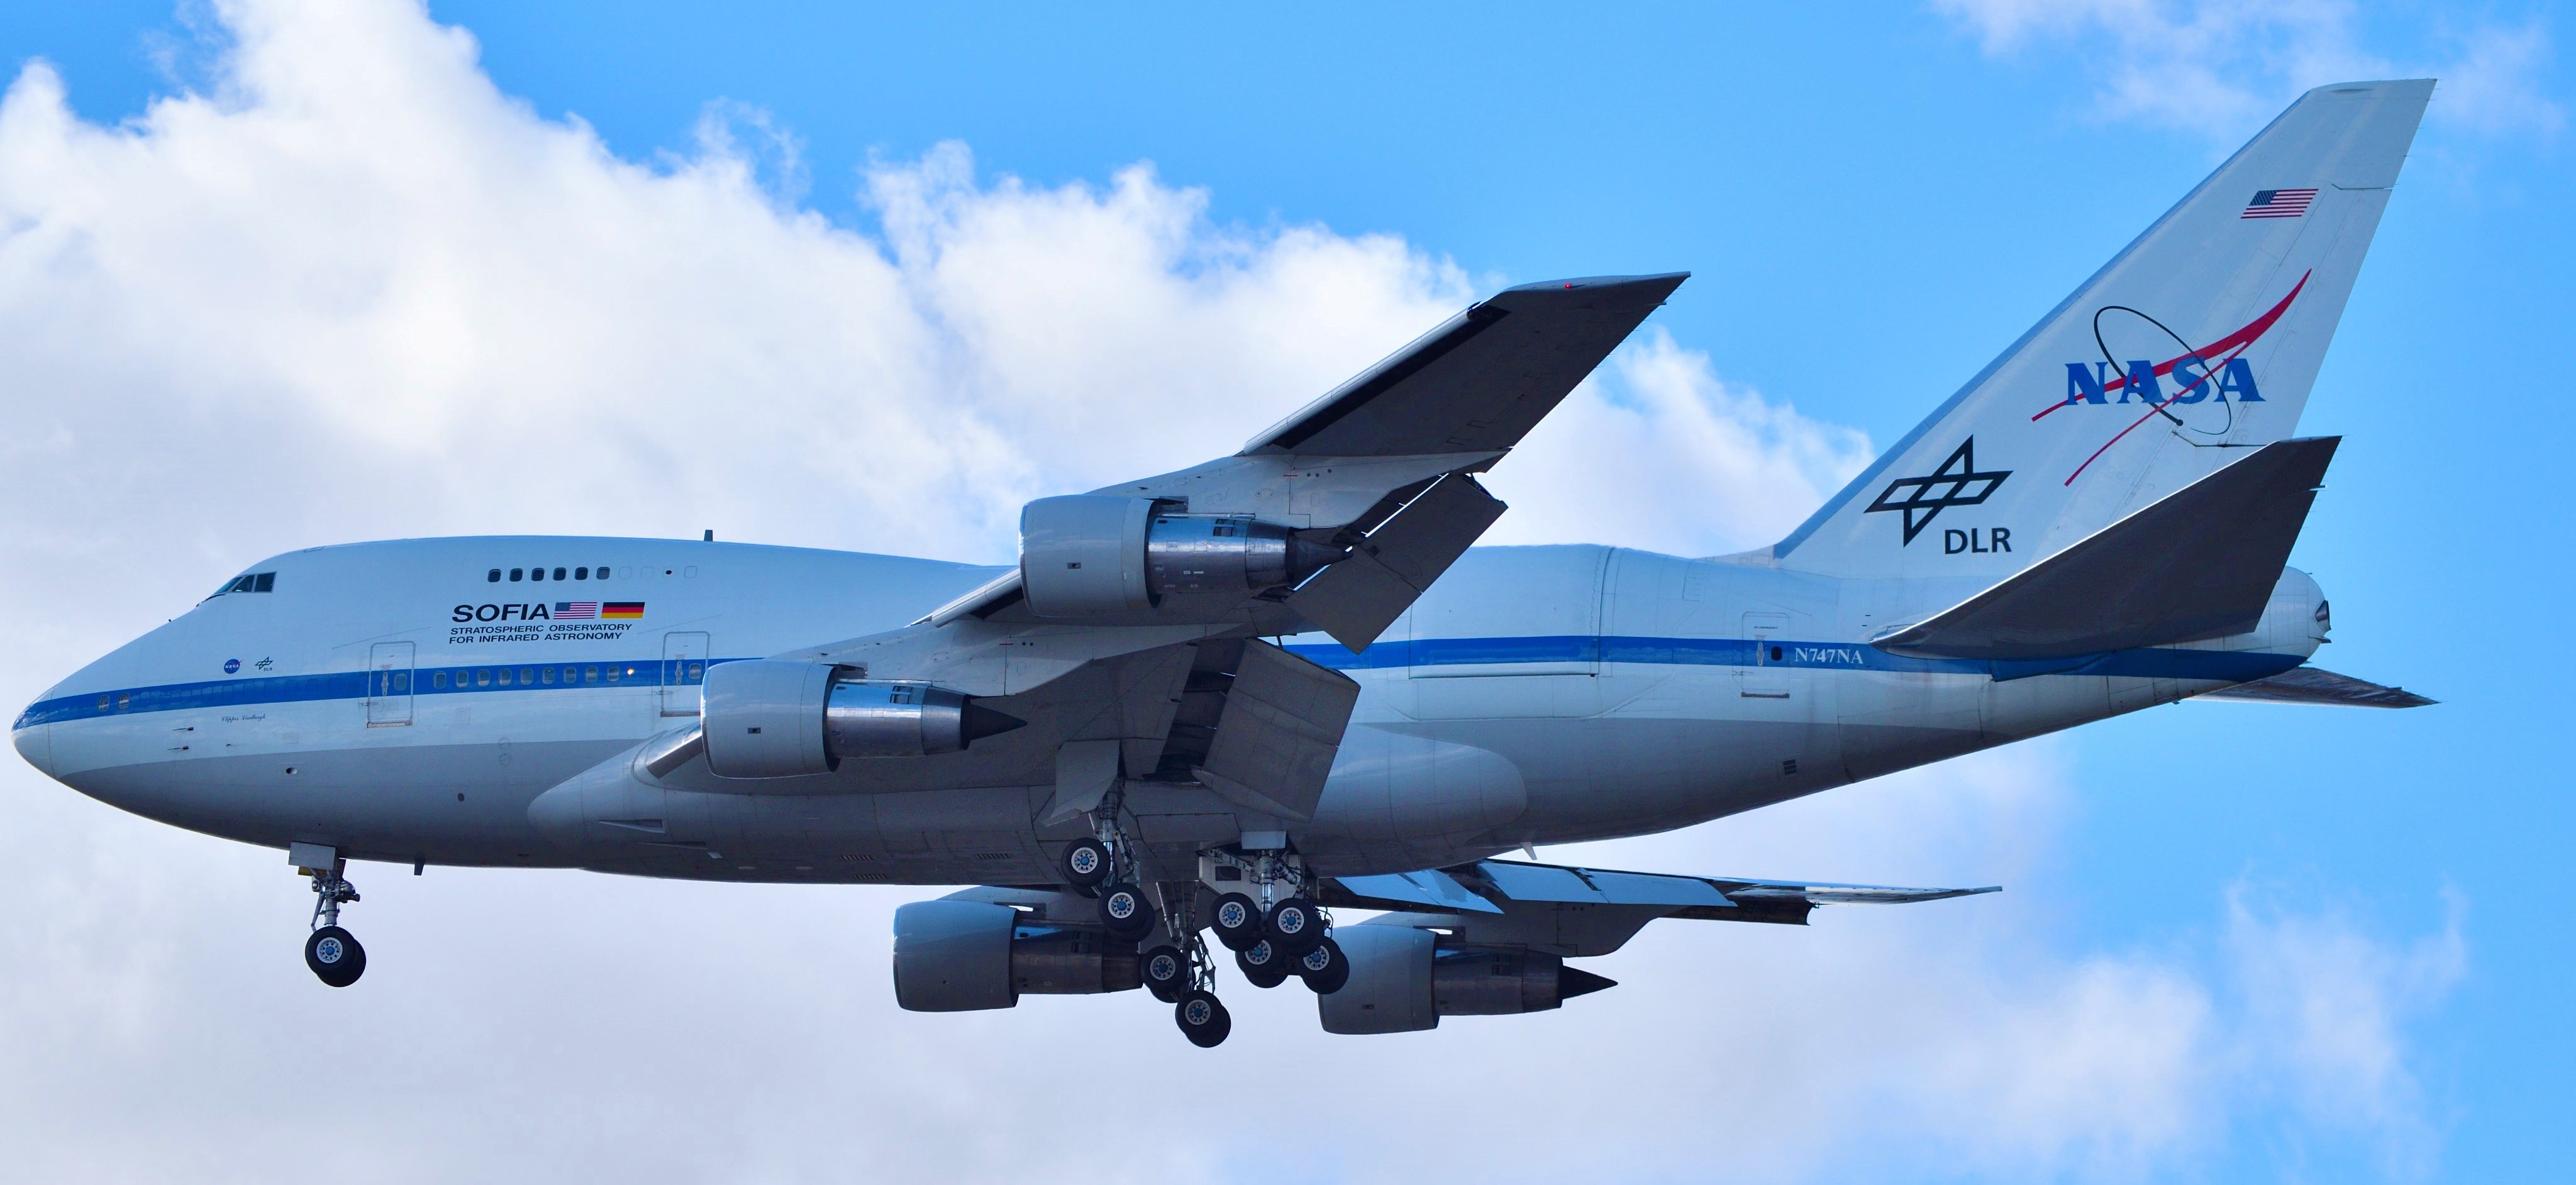 SOFIA (Stratospheric Observatory for Infrared Astronomy)  took off  for  One last  time  ,  Pima Air & Space Museum is the New Home !